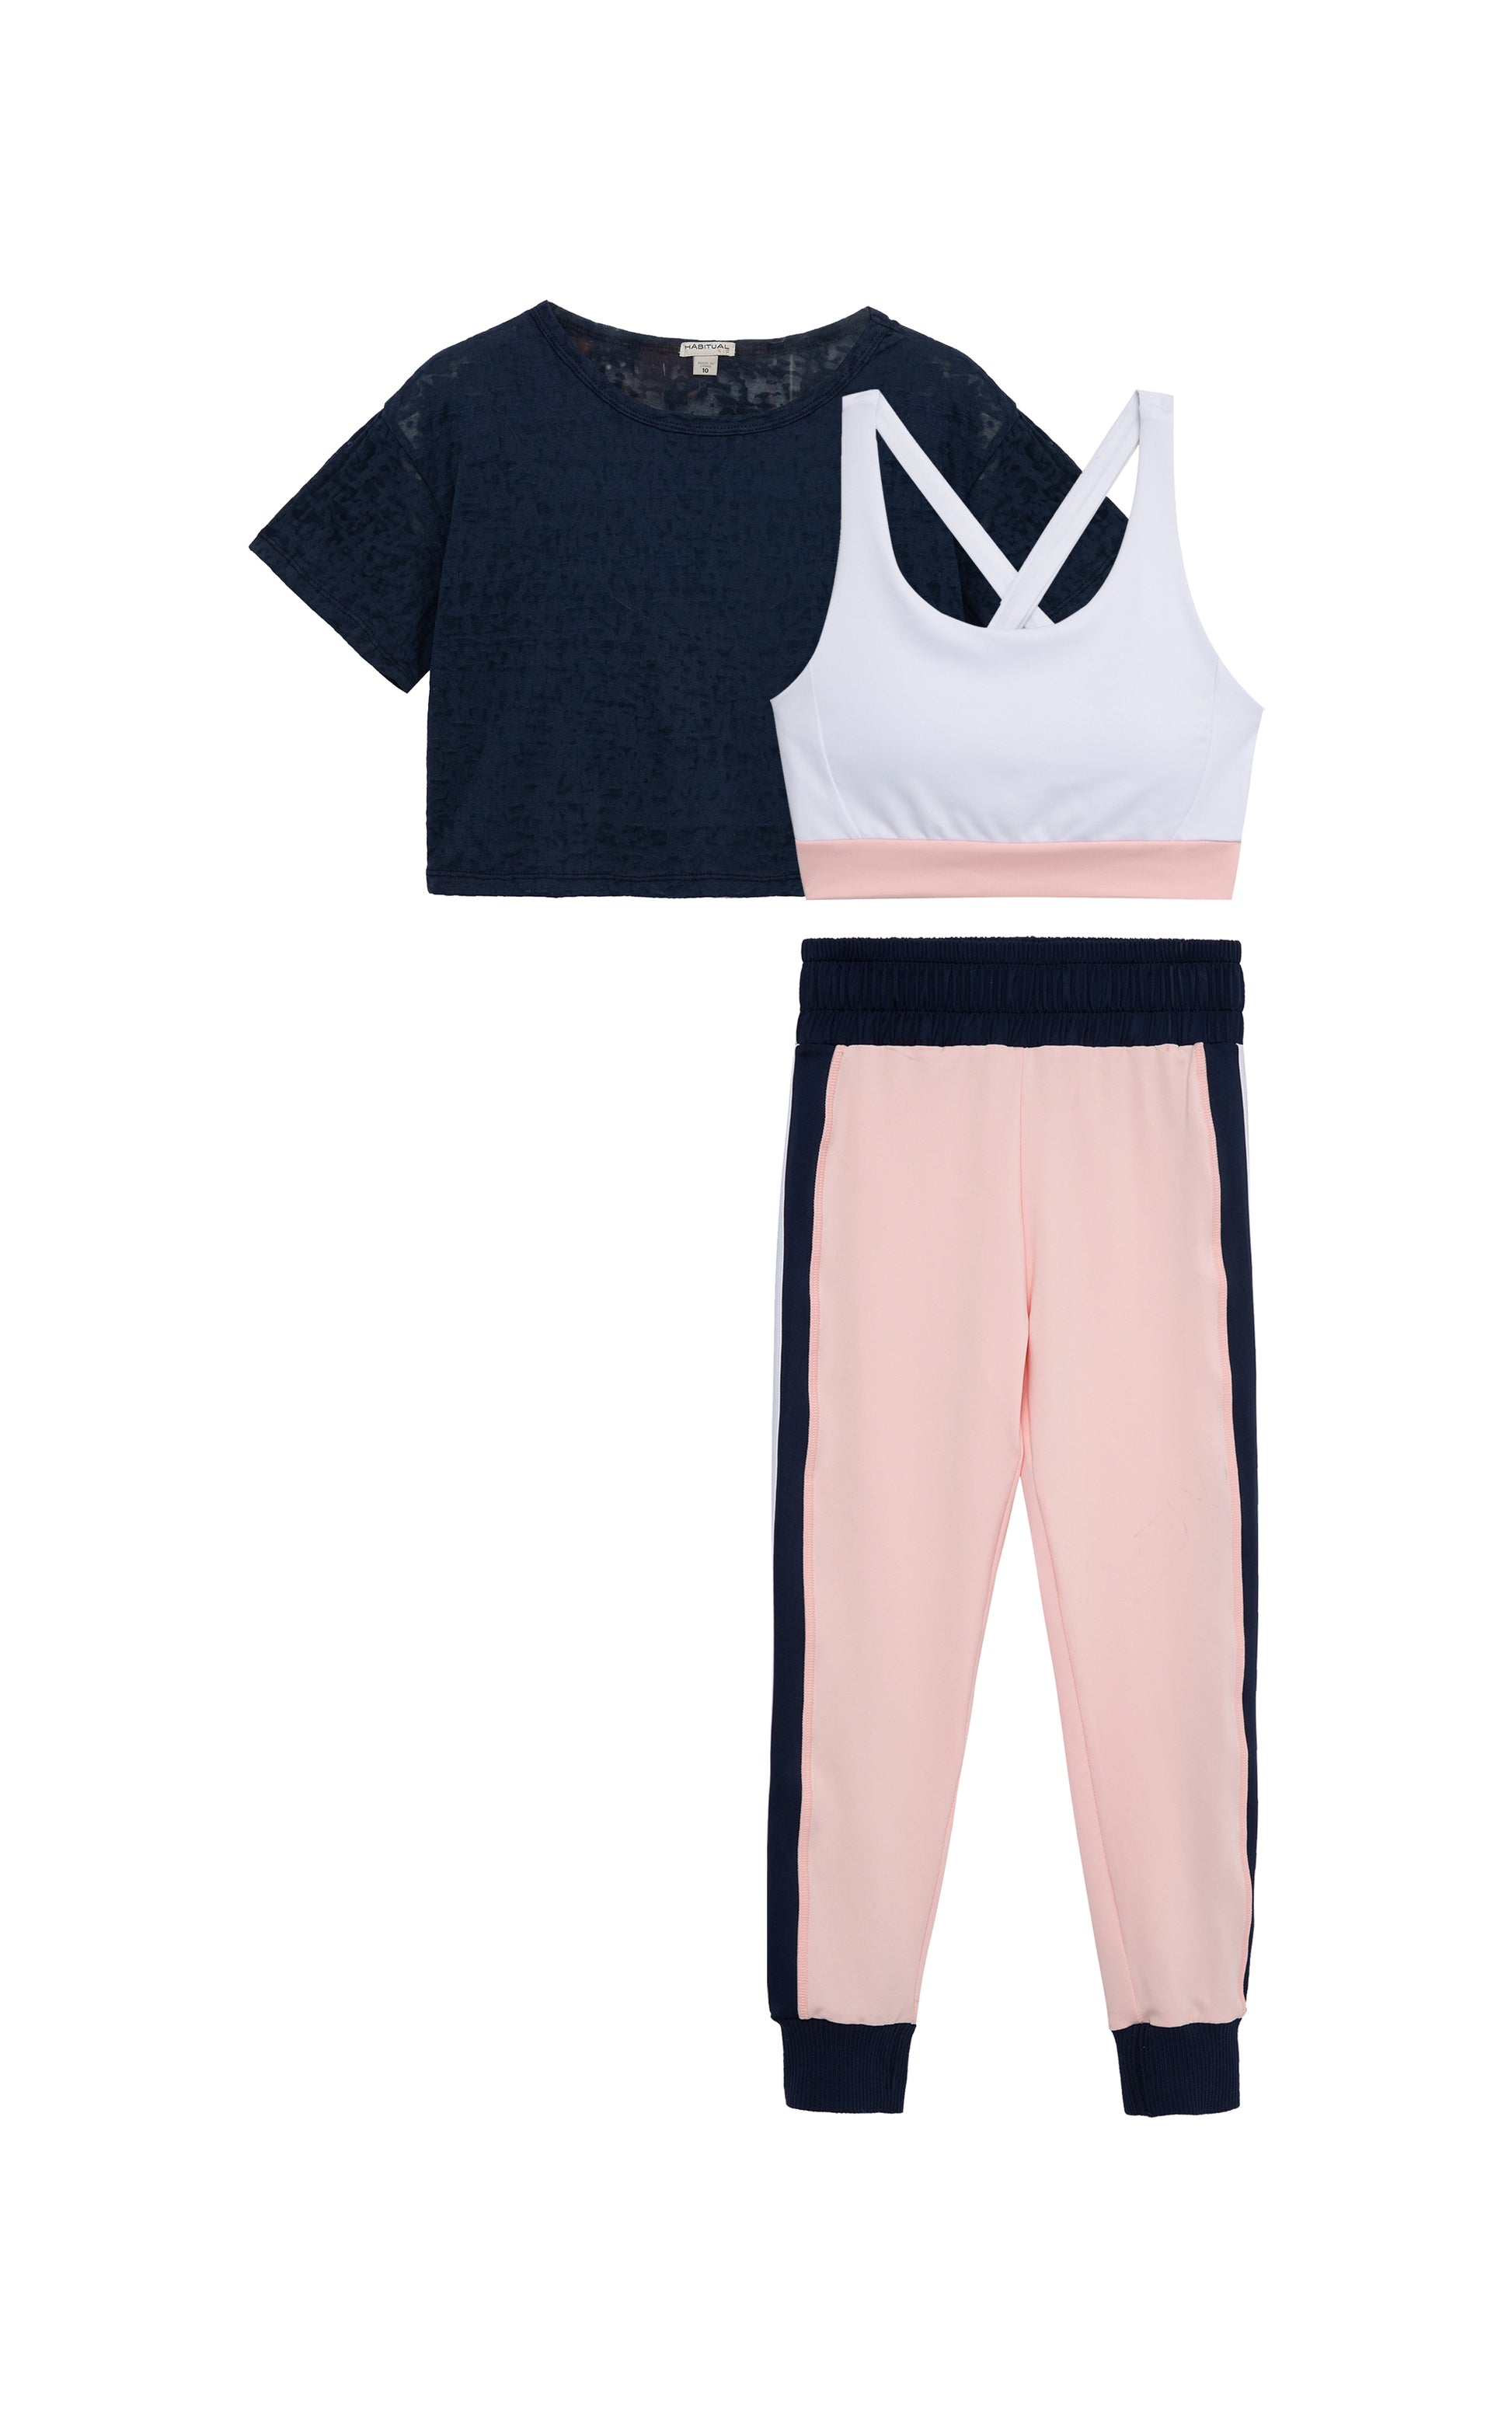 Three-piece active set including navy shirt, white tank top with pink bottom trim, and navy-and-pink leggings